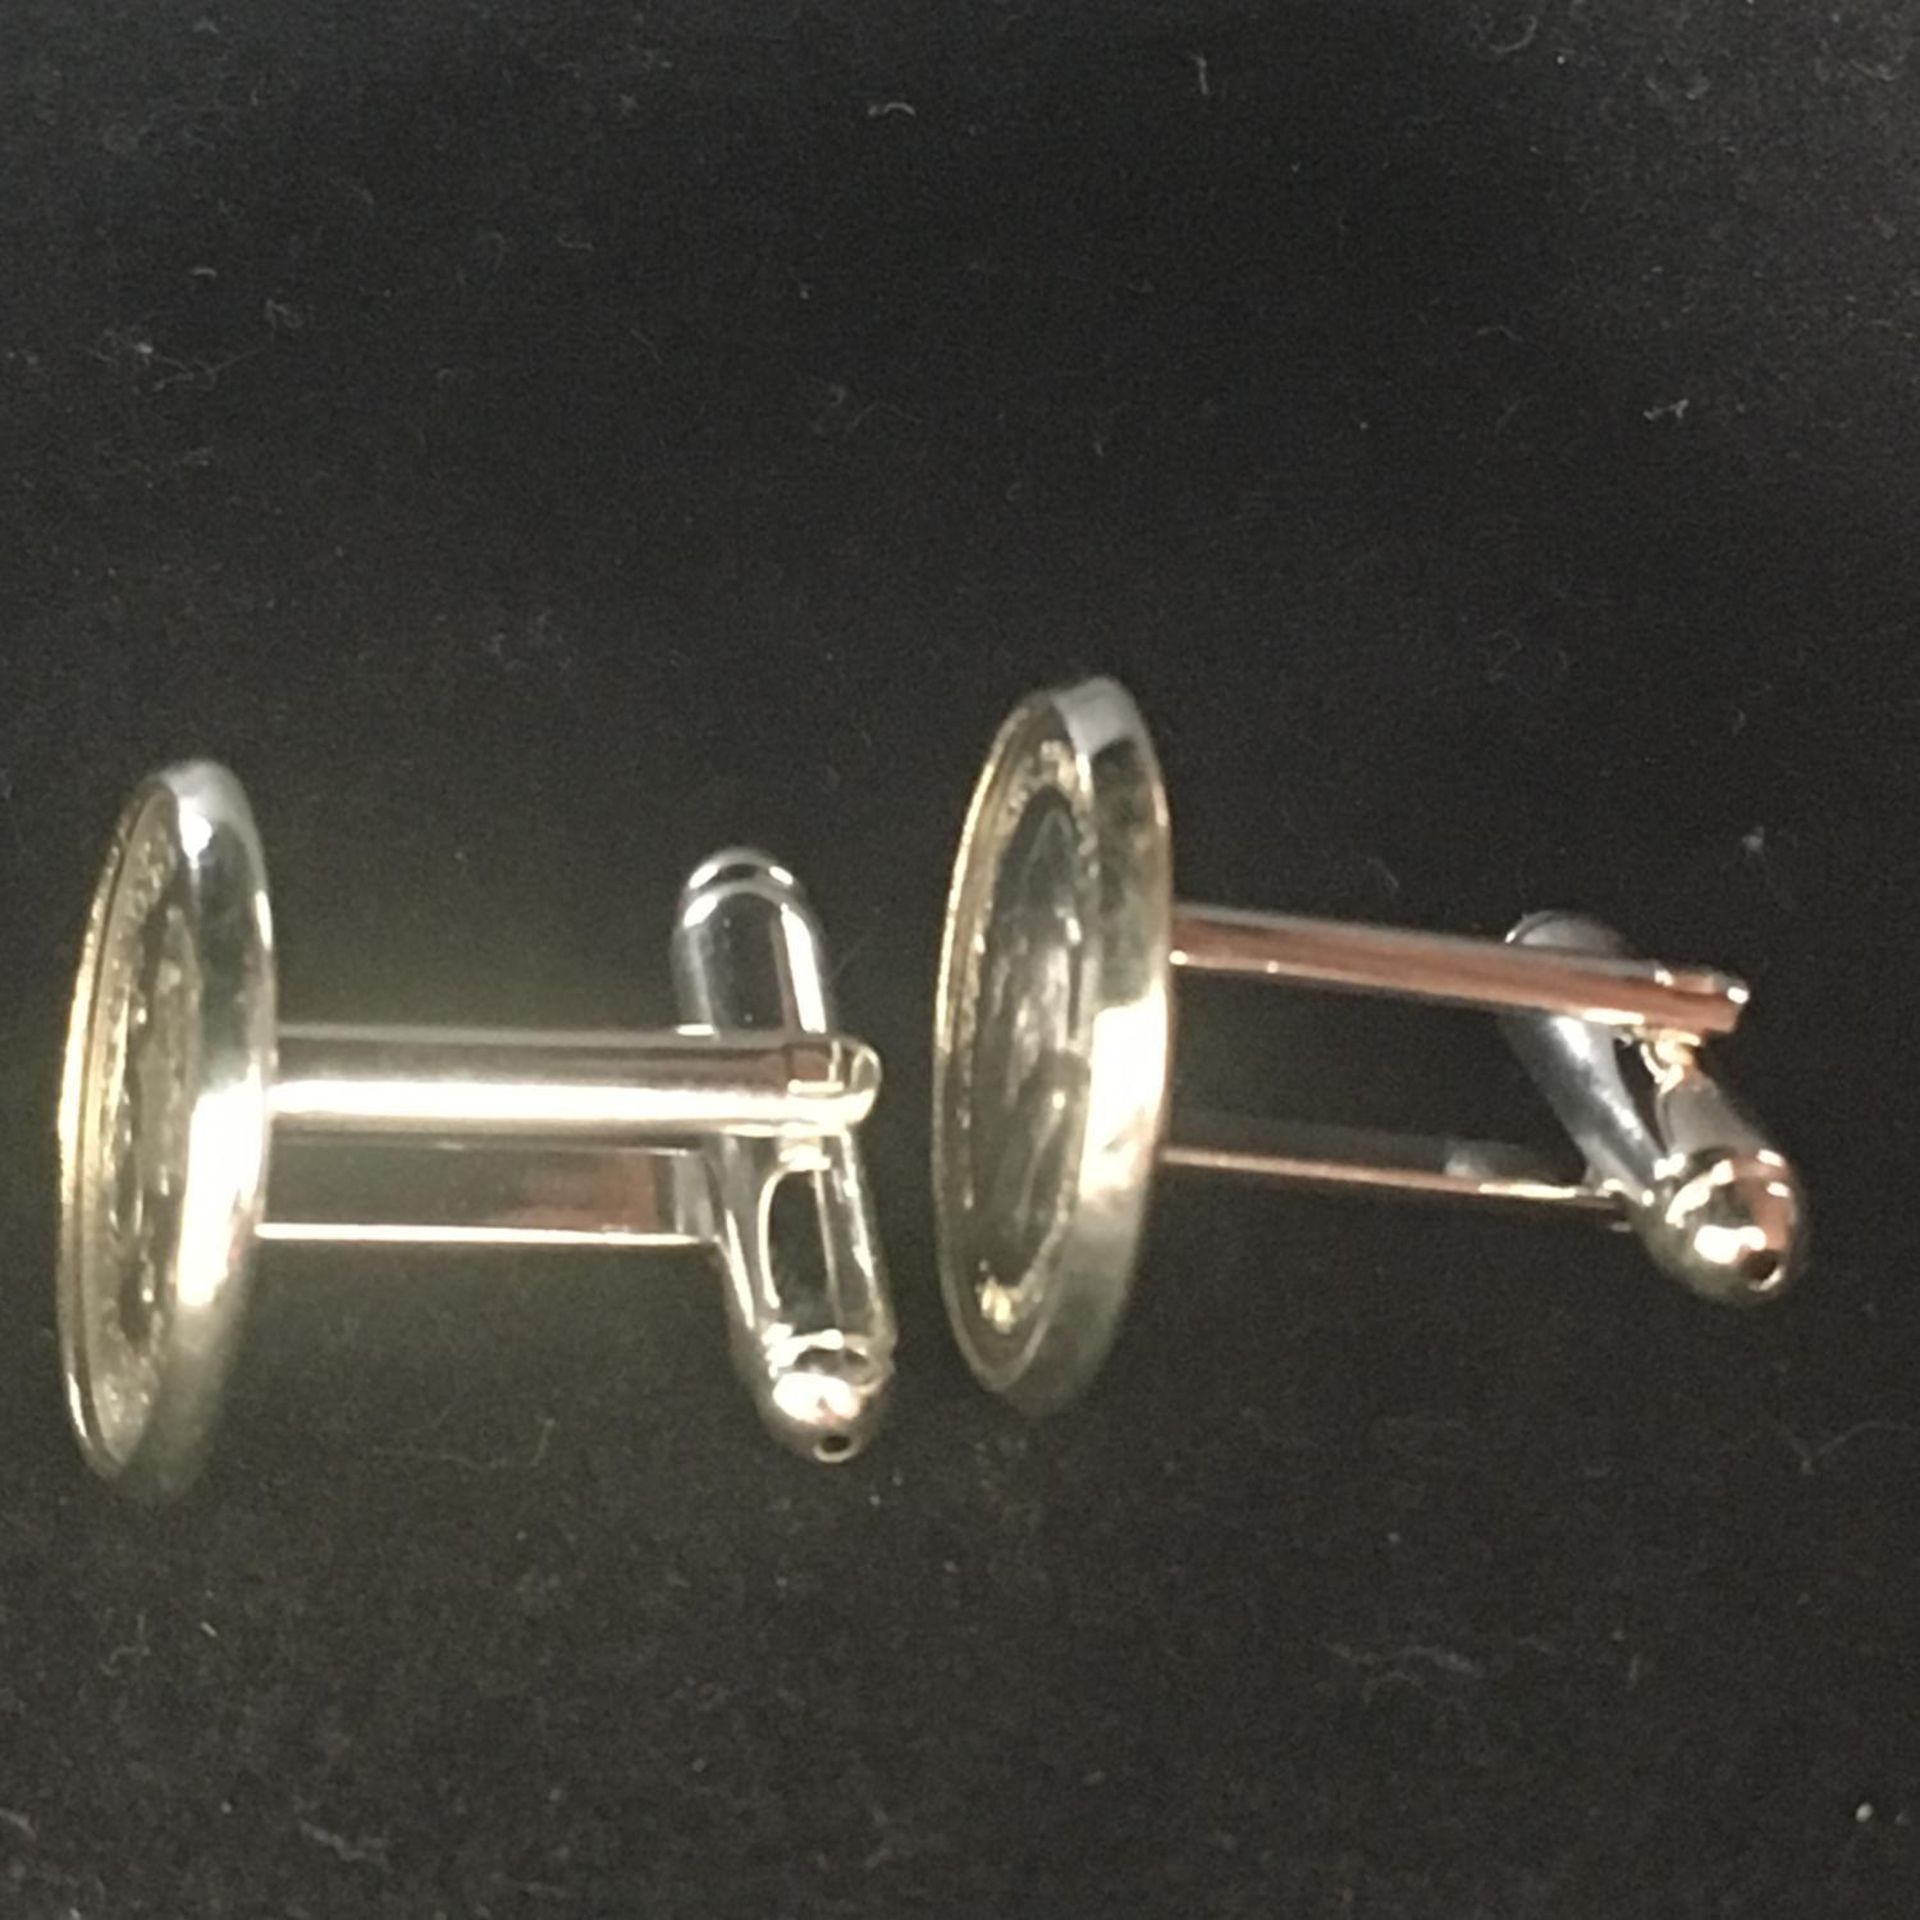 ANTIQUE PAIR OF STERLING SILVER THREEPENCES CUFFLINKS. Dated 1915 and set in silver plated - Image 2 of 3